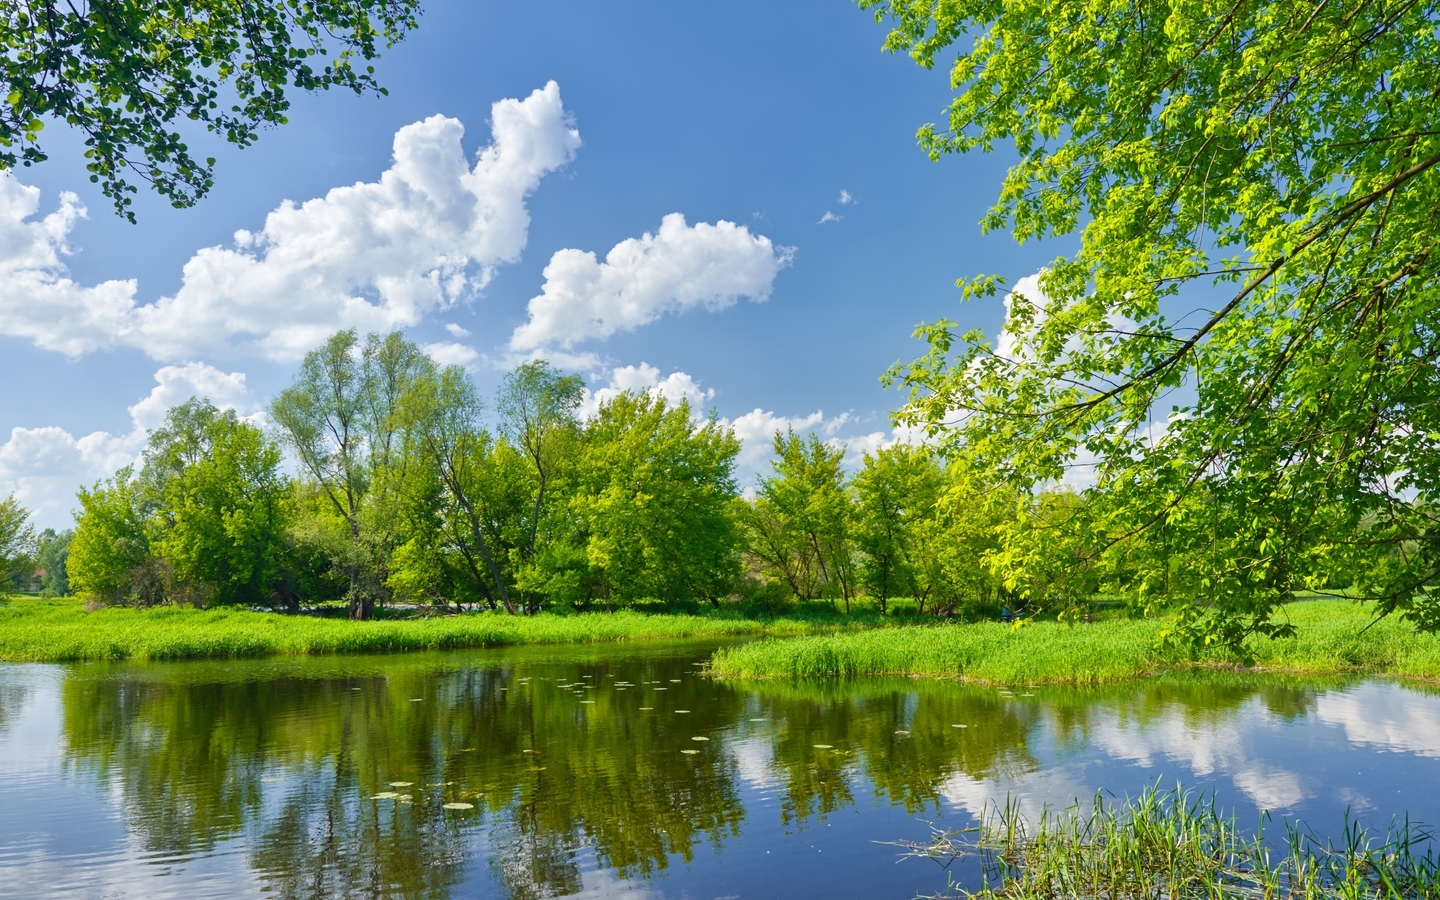 Image: River, summer, landscape, water, reflection, trees, clouds